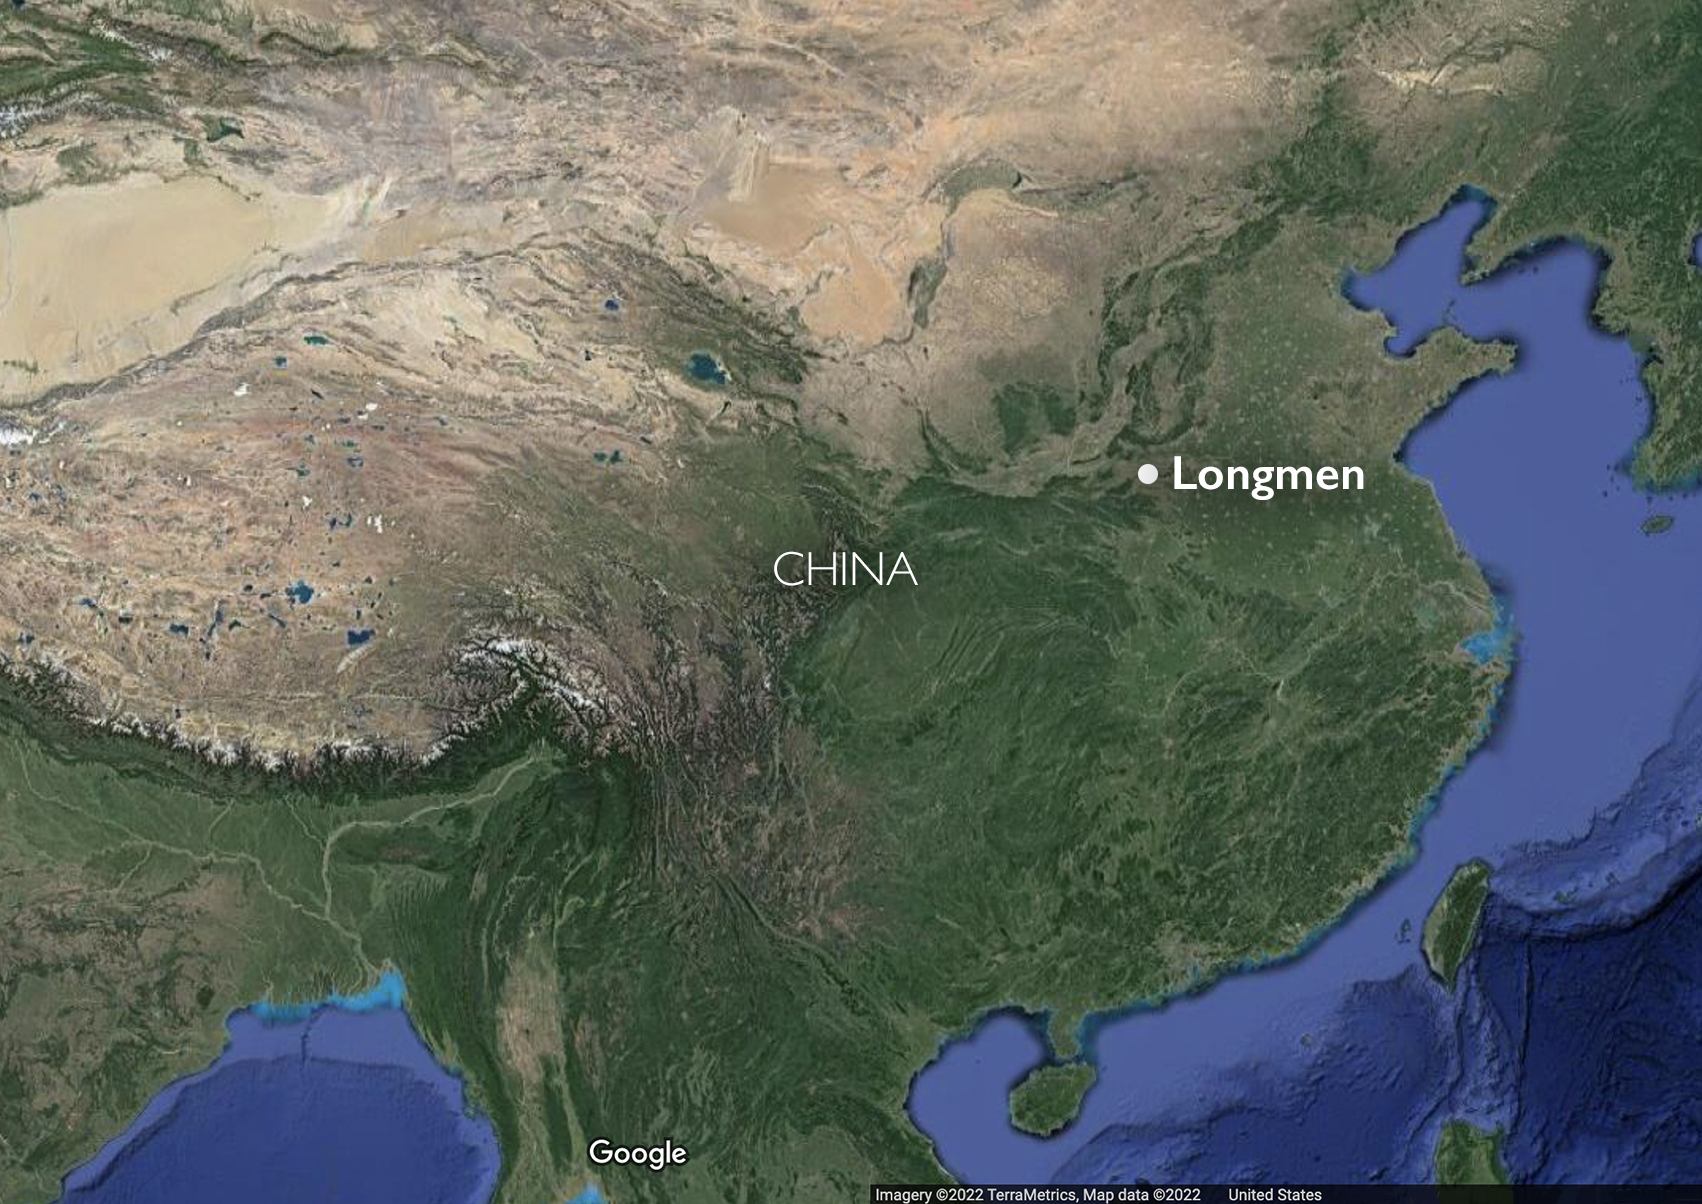 Which Labeled Line Indicates the Great Wall of China 